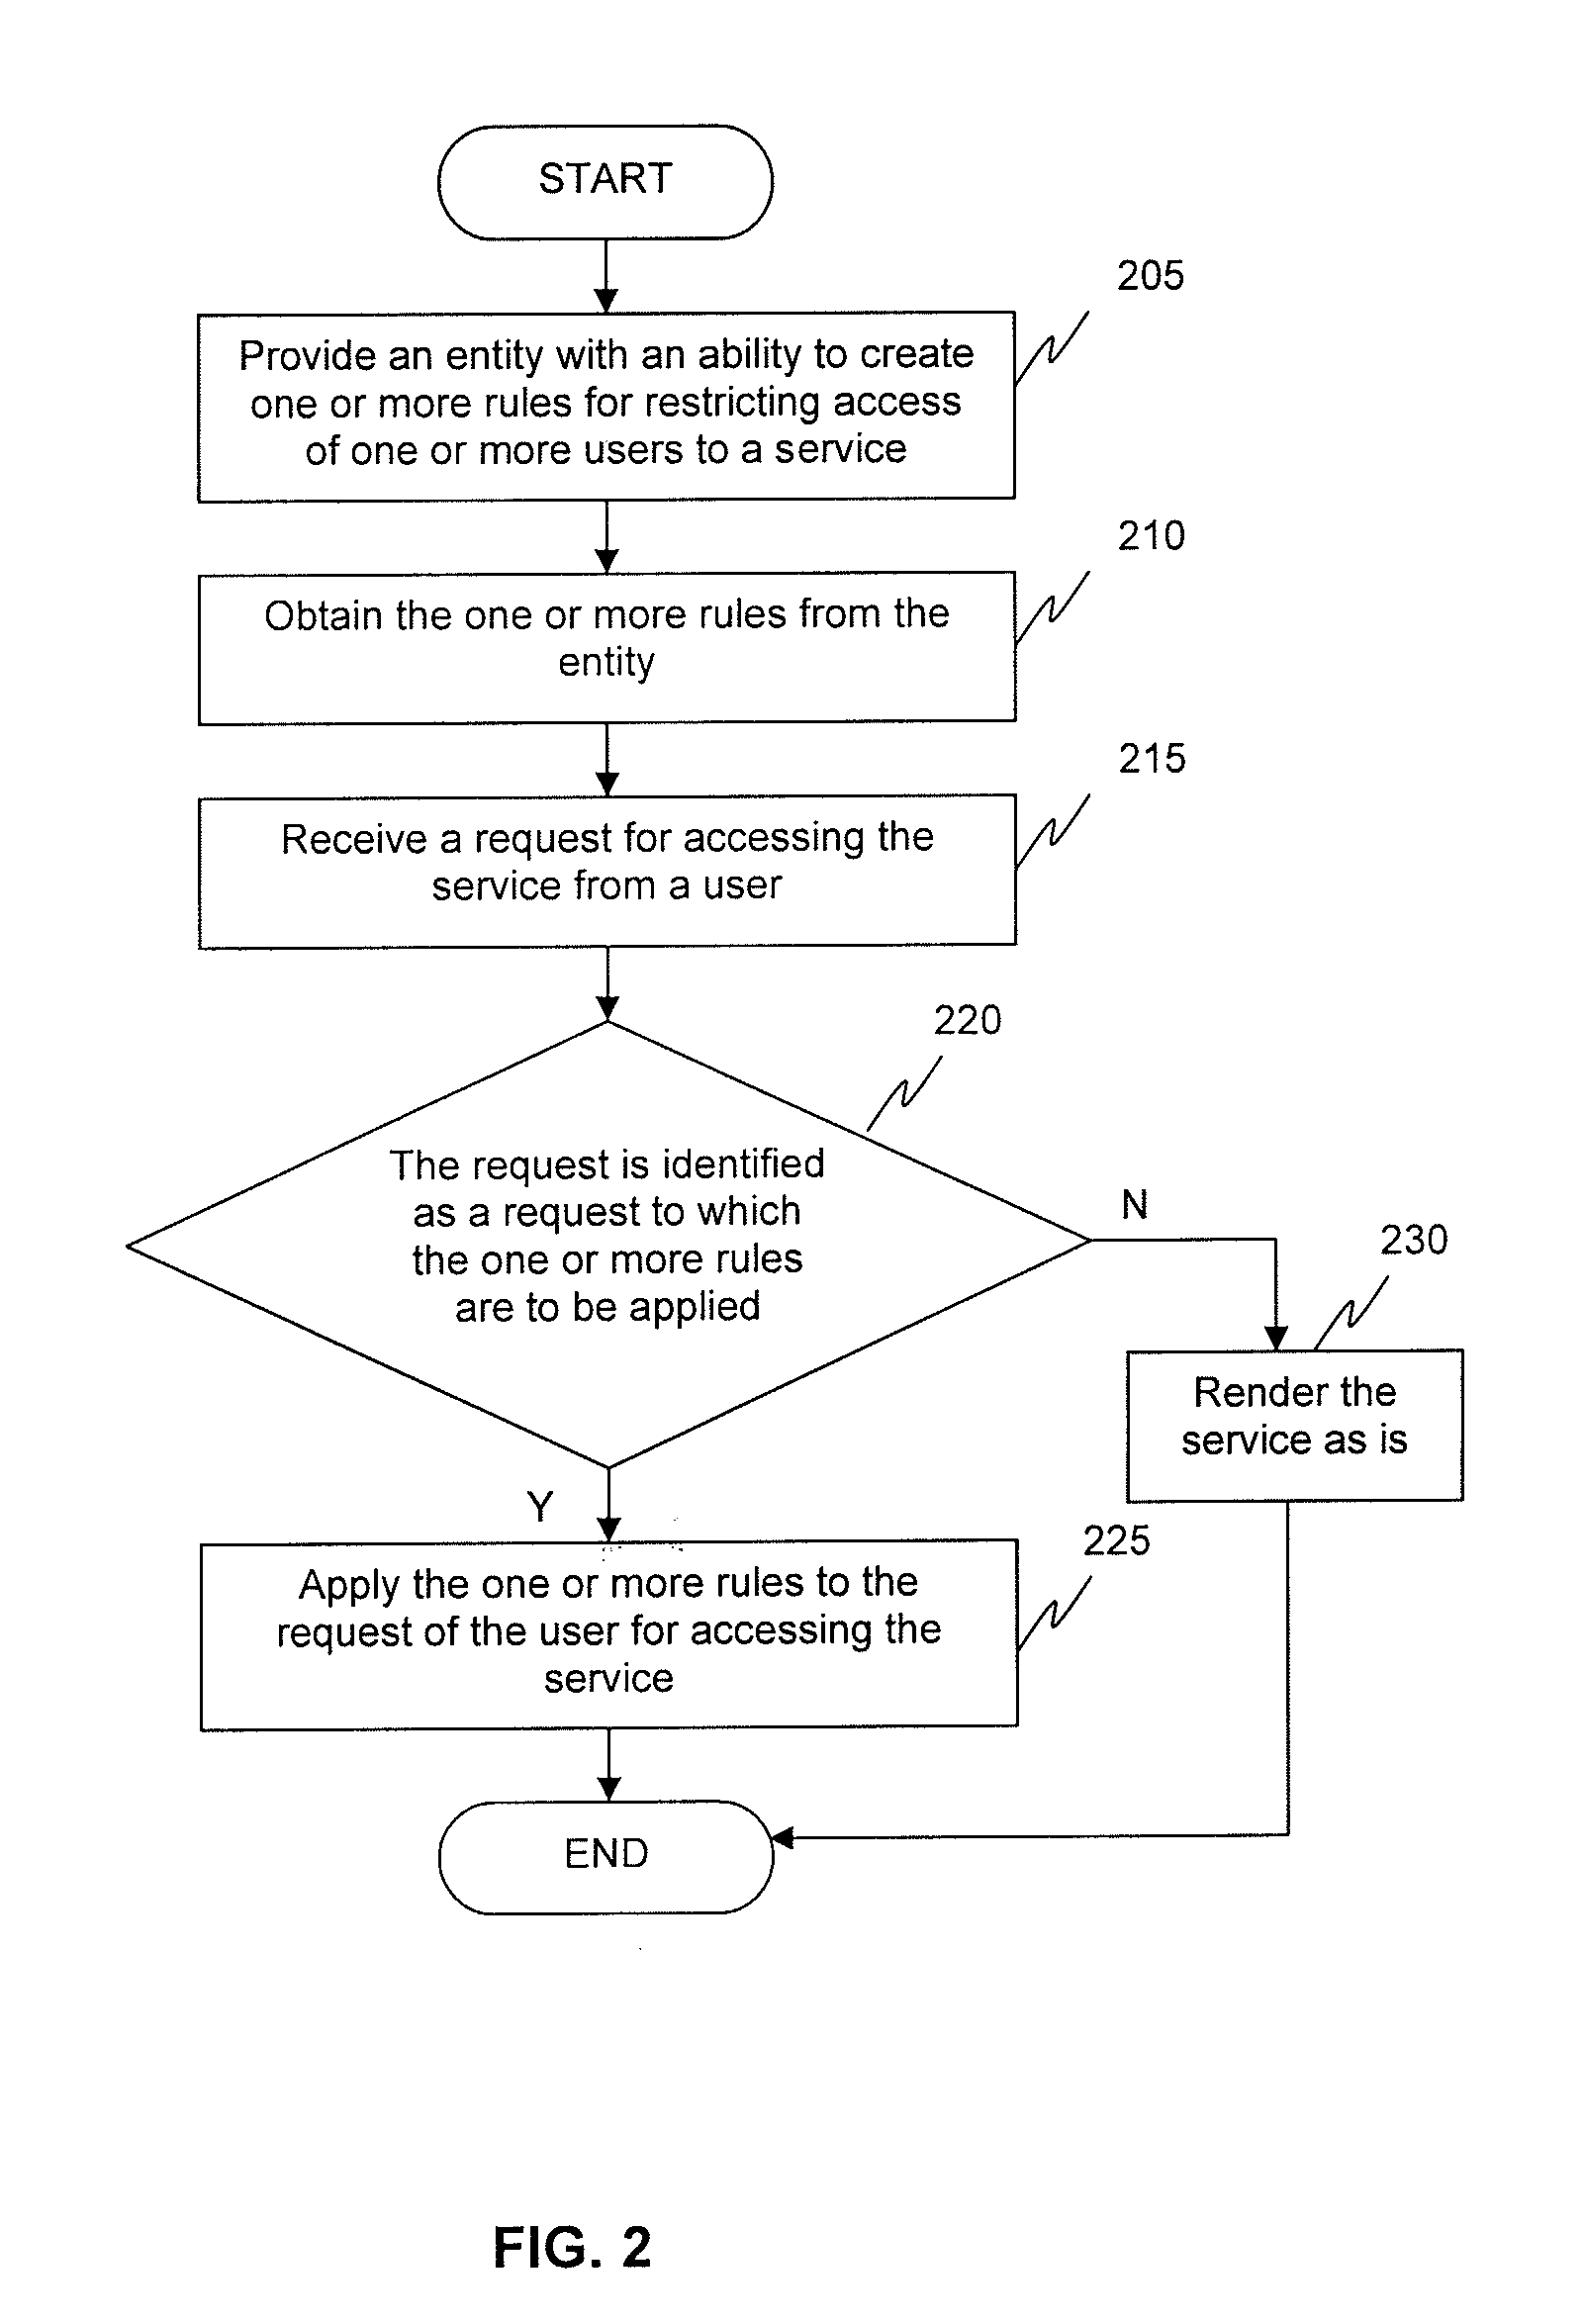 Method and System for Restricting Access of One or More Users to a Service